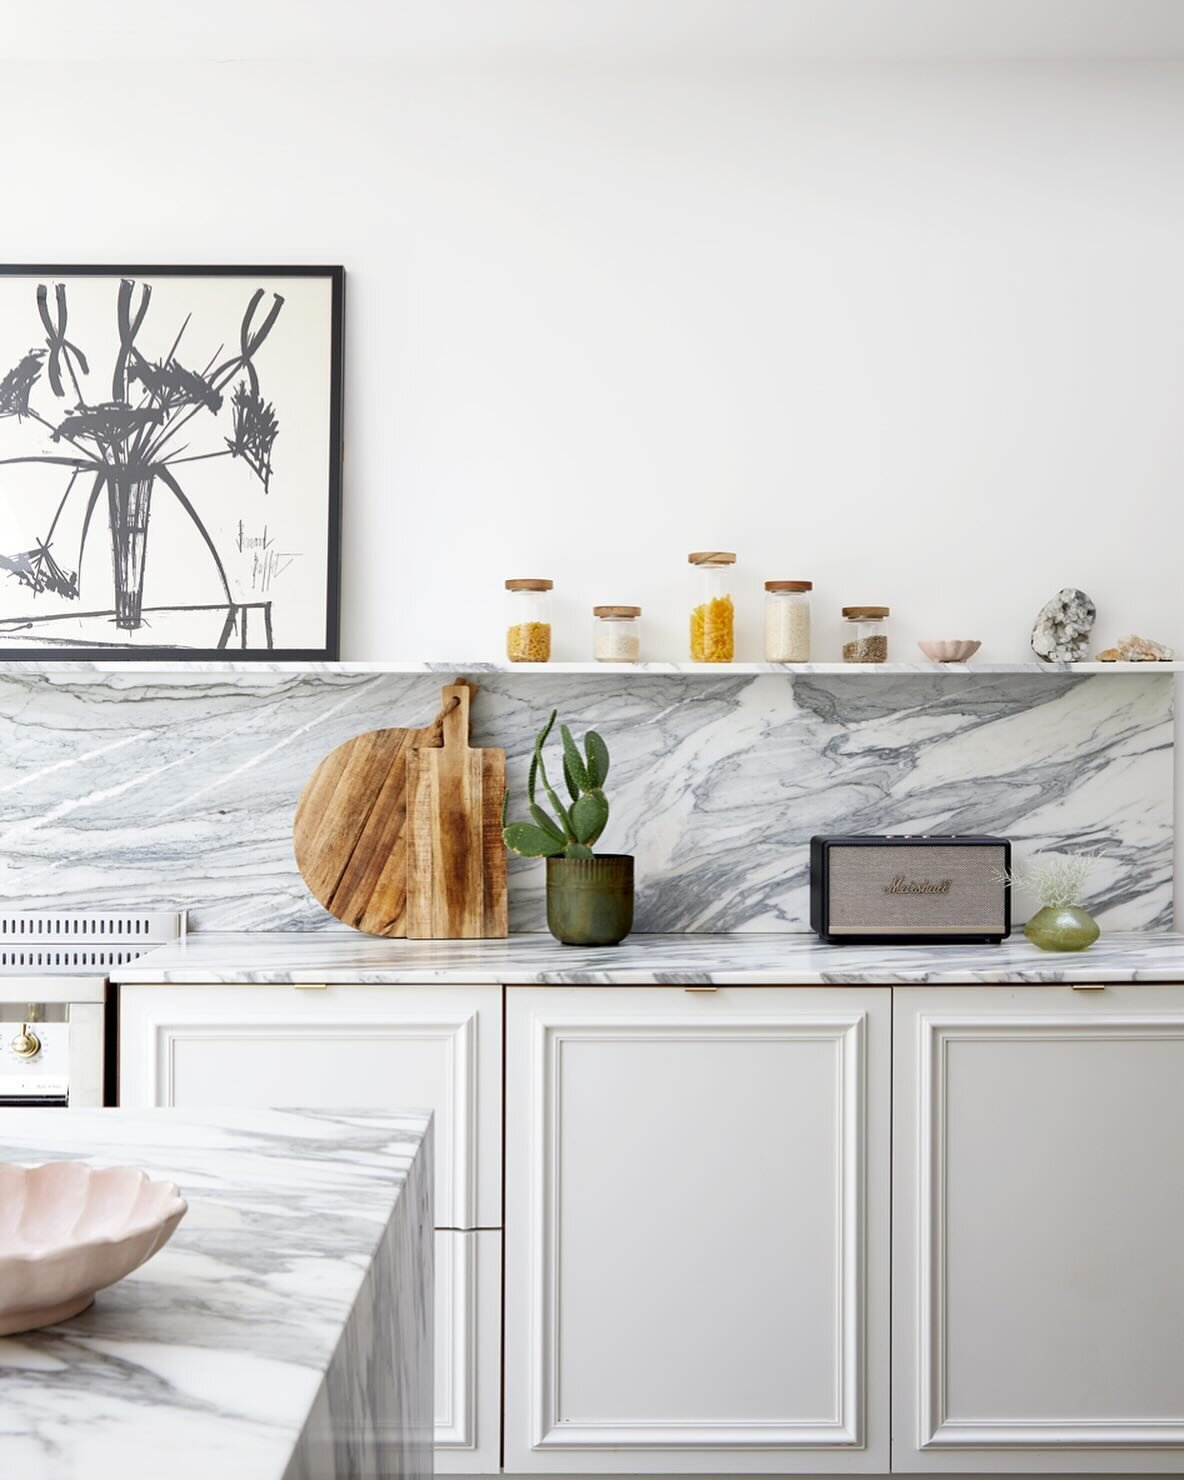 Clean lines and lots of marble, in our bespoke kitchen in South london. 
.
.
#kitchen #kitchendesign #interior #interiordesign #bespokefurniture #kitchendecor #art #interiorart #decor #interiorstyling #marble #marblekitchen 
.
📷 @annastathakiphoto 
